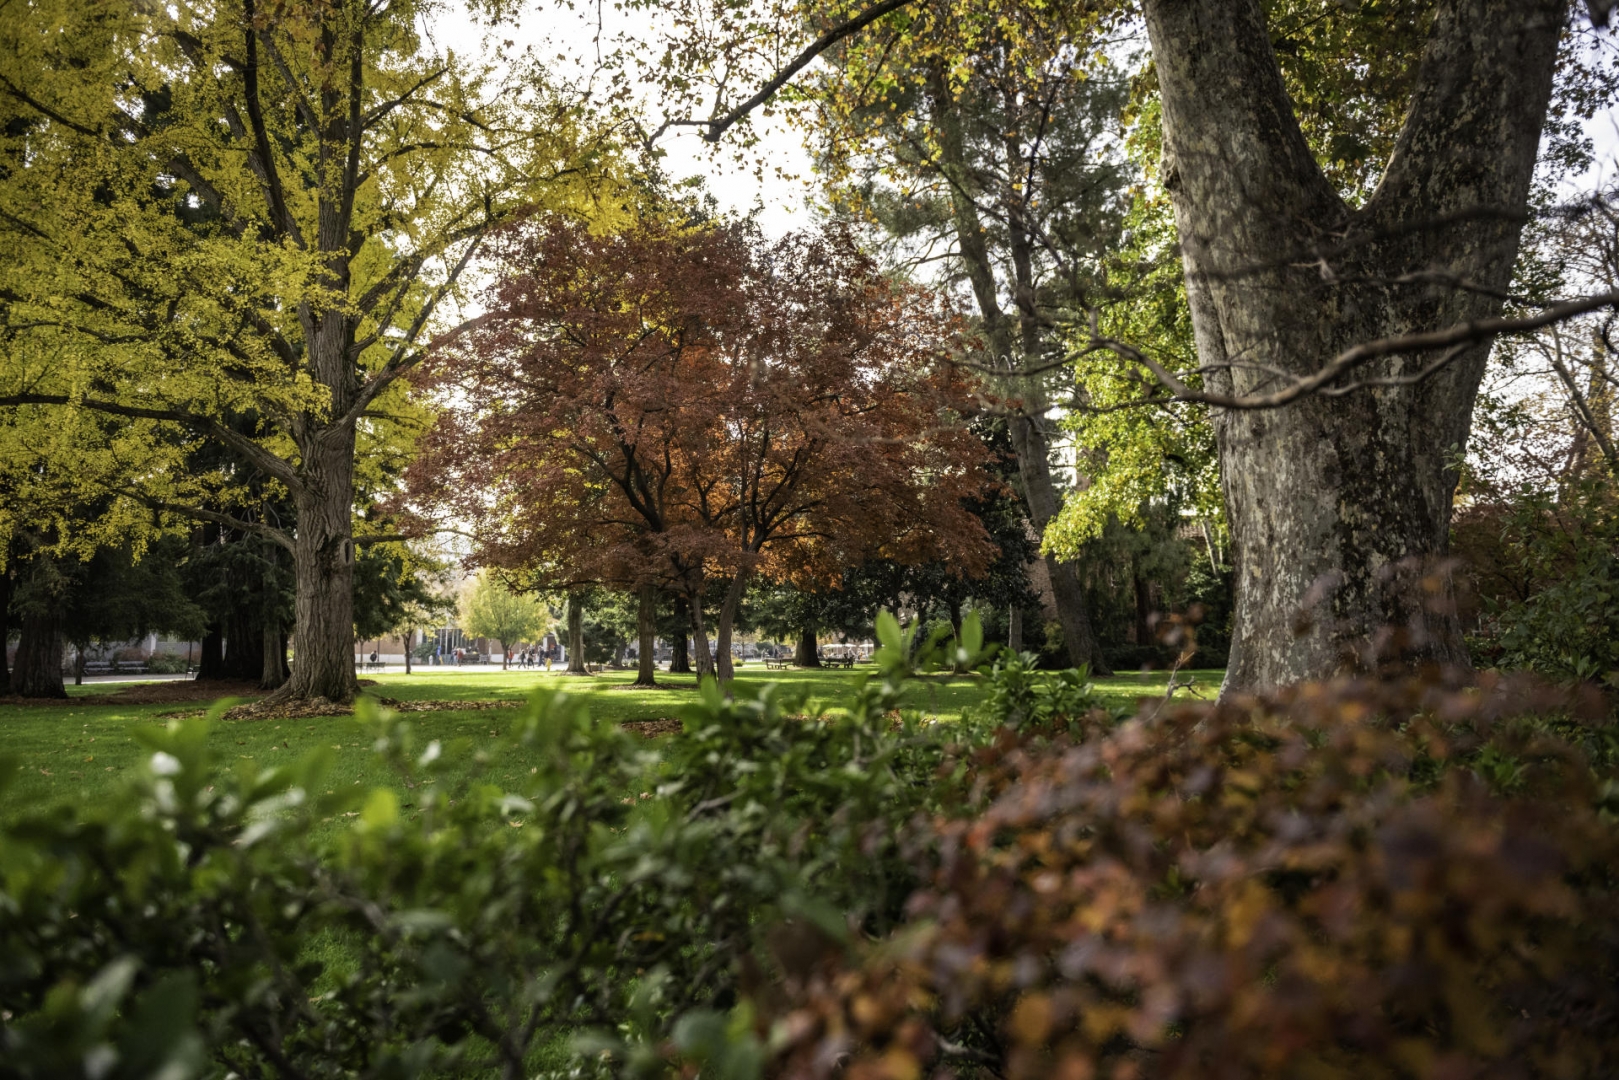 Trees await the full dropping of their leaves on the green grass of the Kendall Hall lawn.